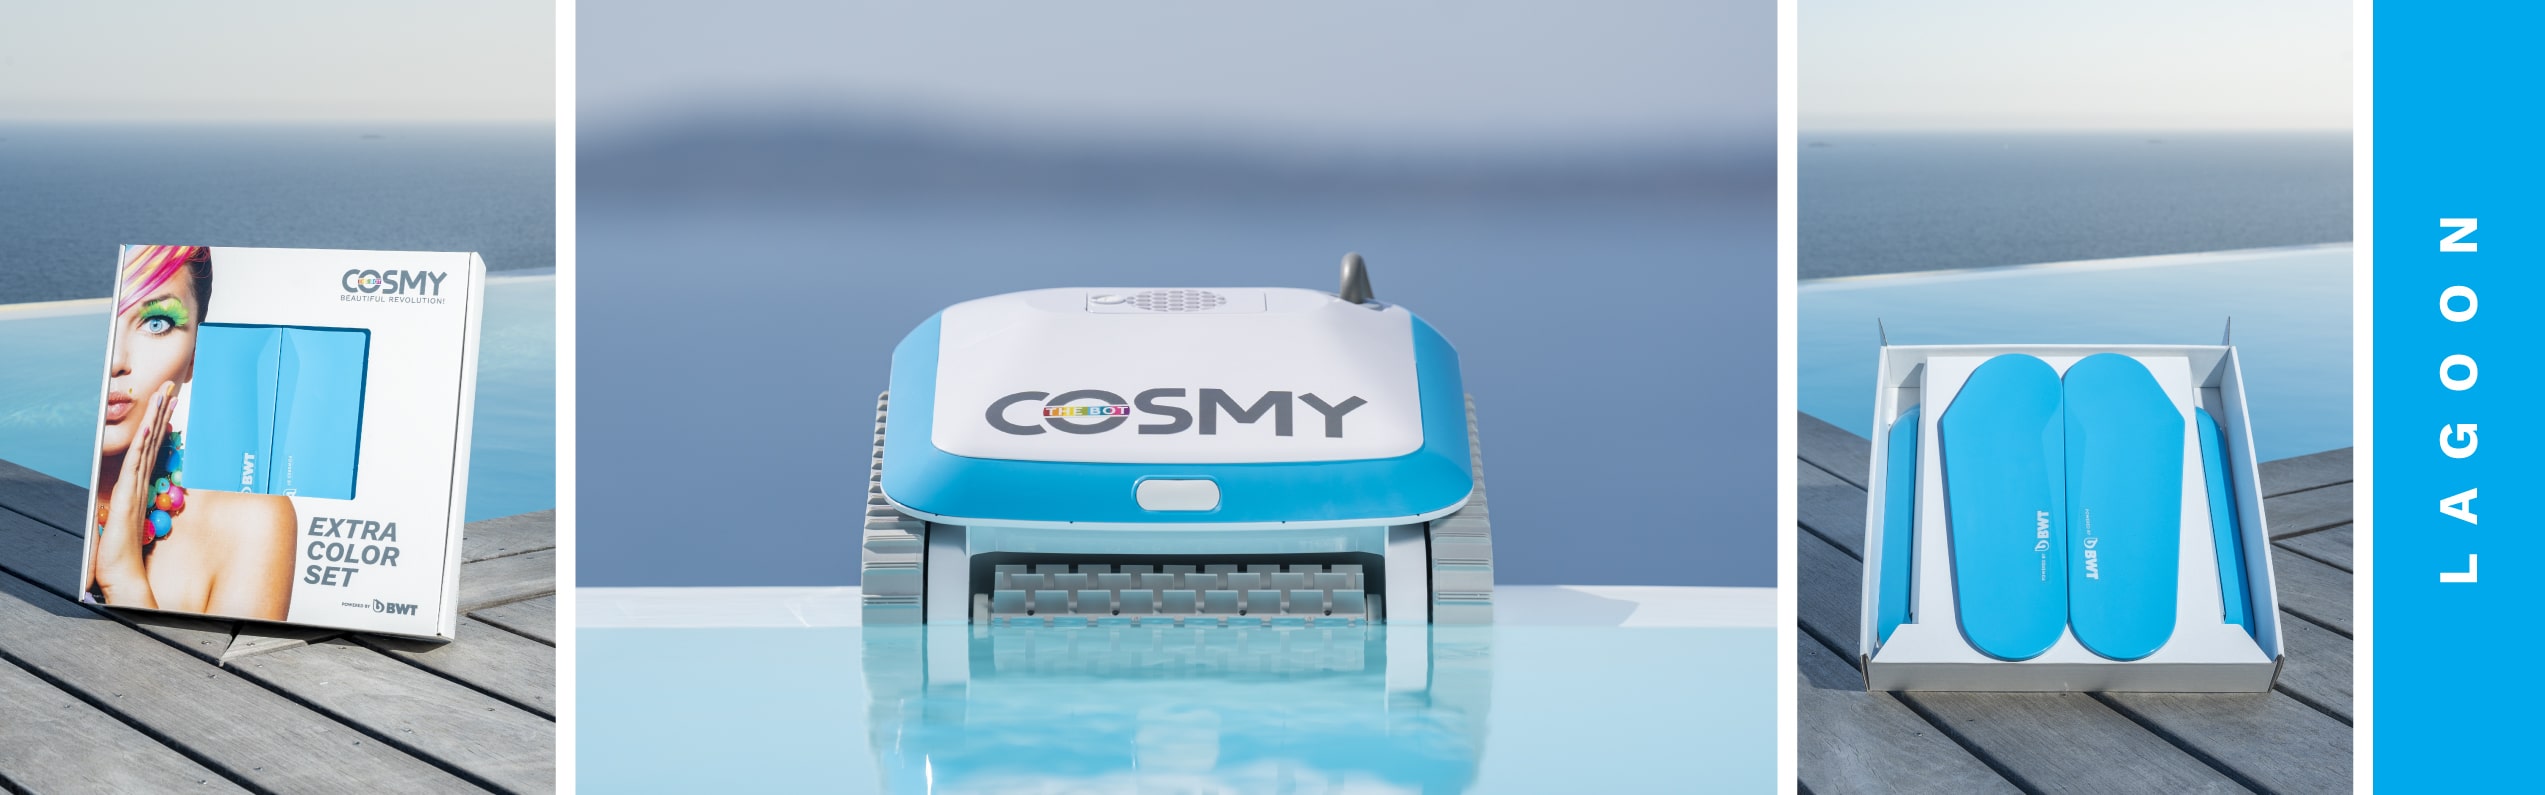 robot cosmy kit couleur lagoon